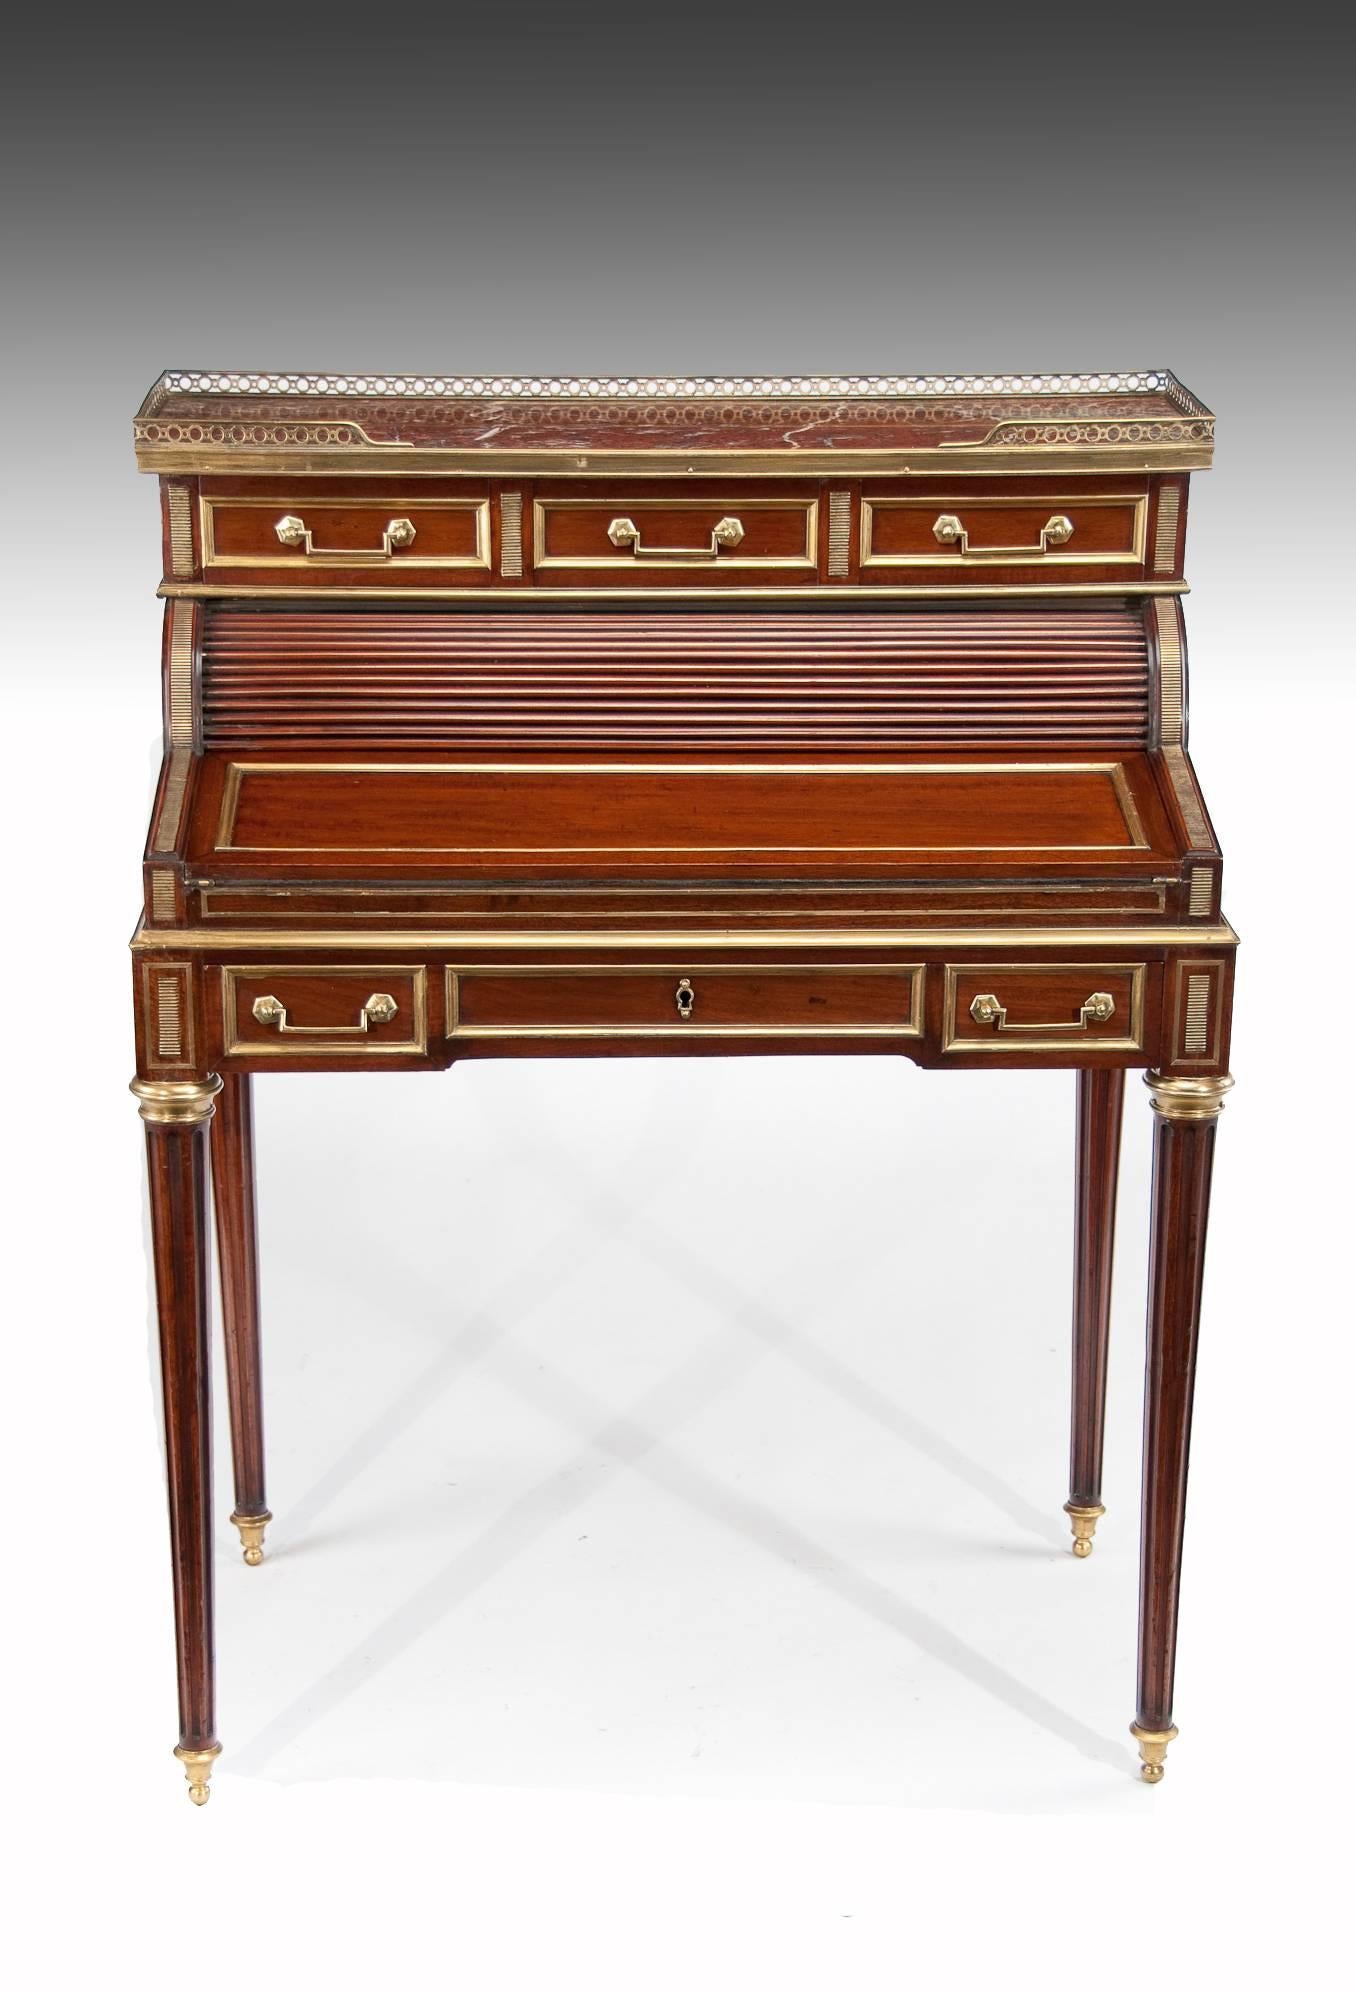 A very good quality Louis XVI style mahogany and brass French tambour ladies writing desk / Bonheur du jour late 19th century.
This attractive desk has a rouge marble with a surrounding brass fretted gallery below which are three drawers with brass